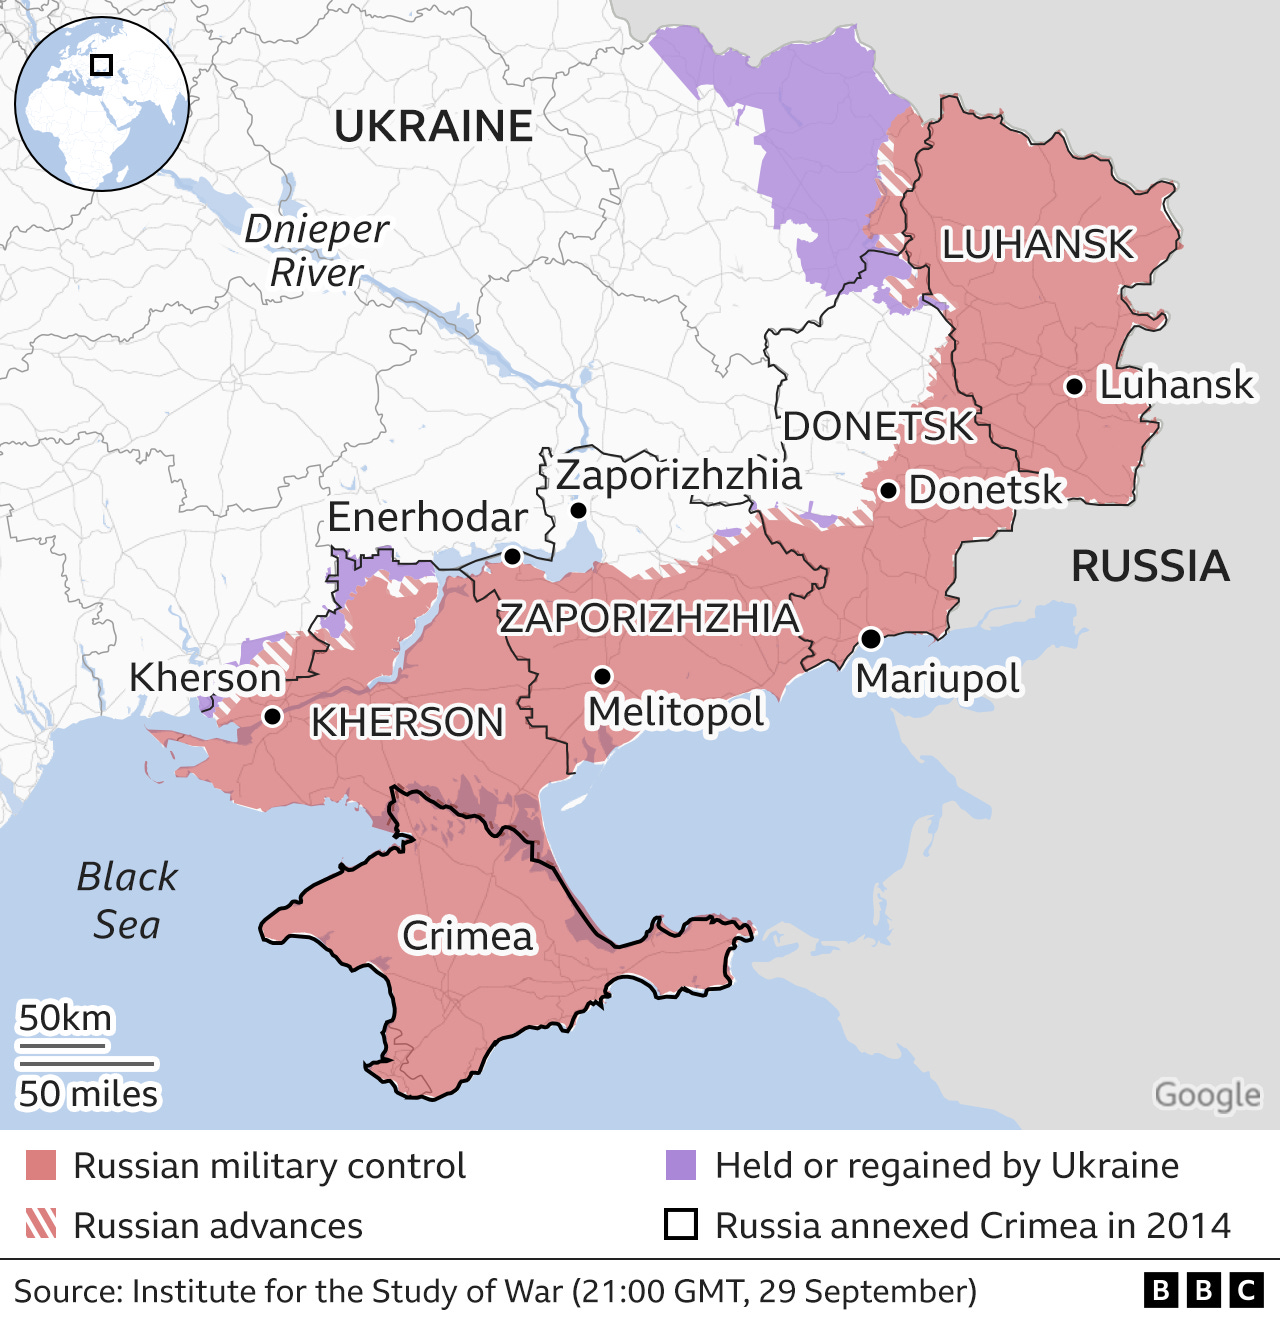 What Russian annexation means for Ukraine's regions - BBC News